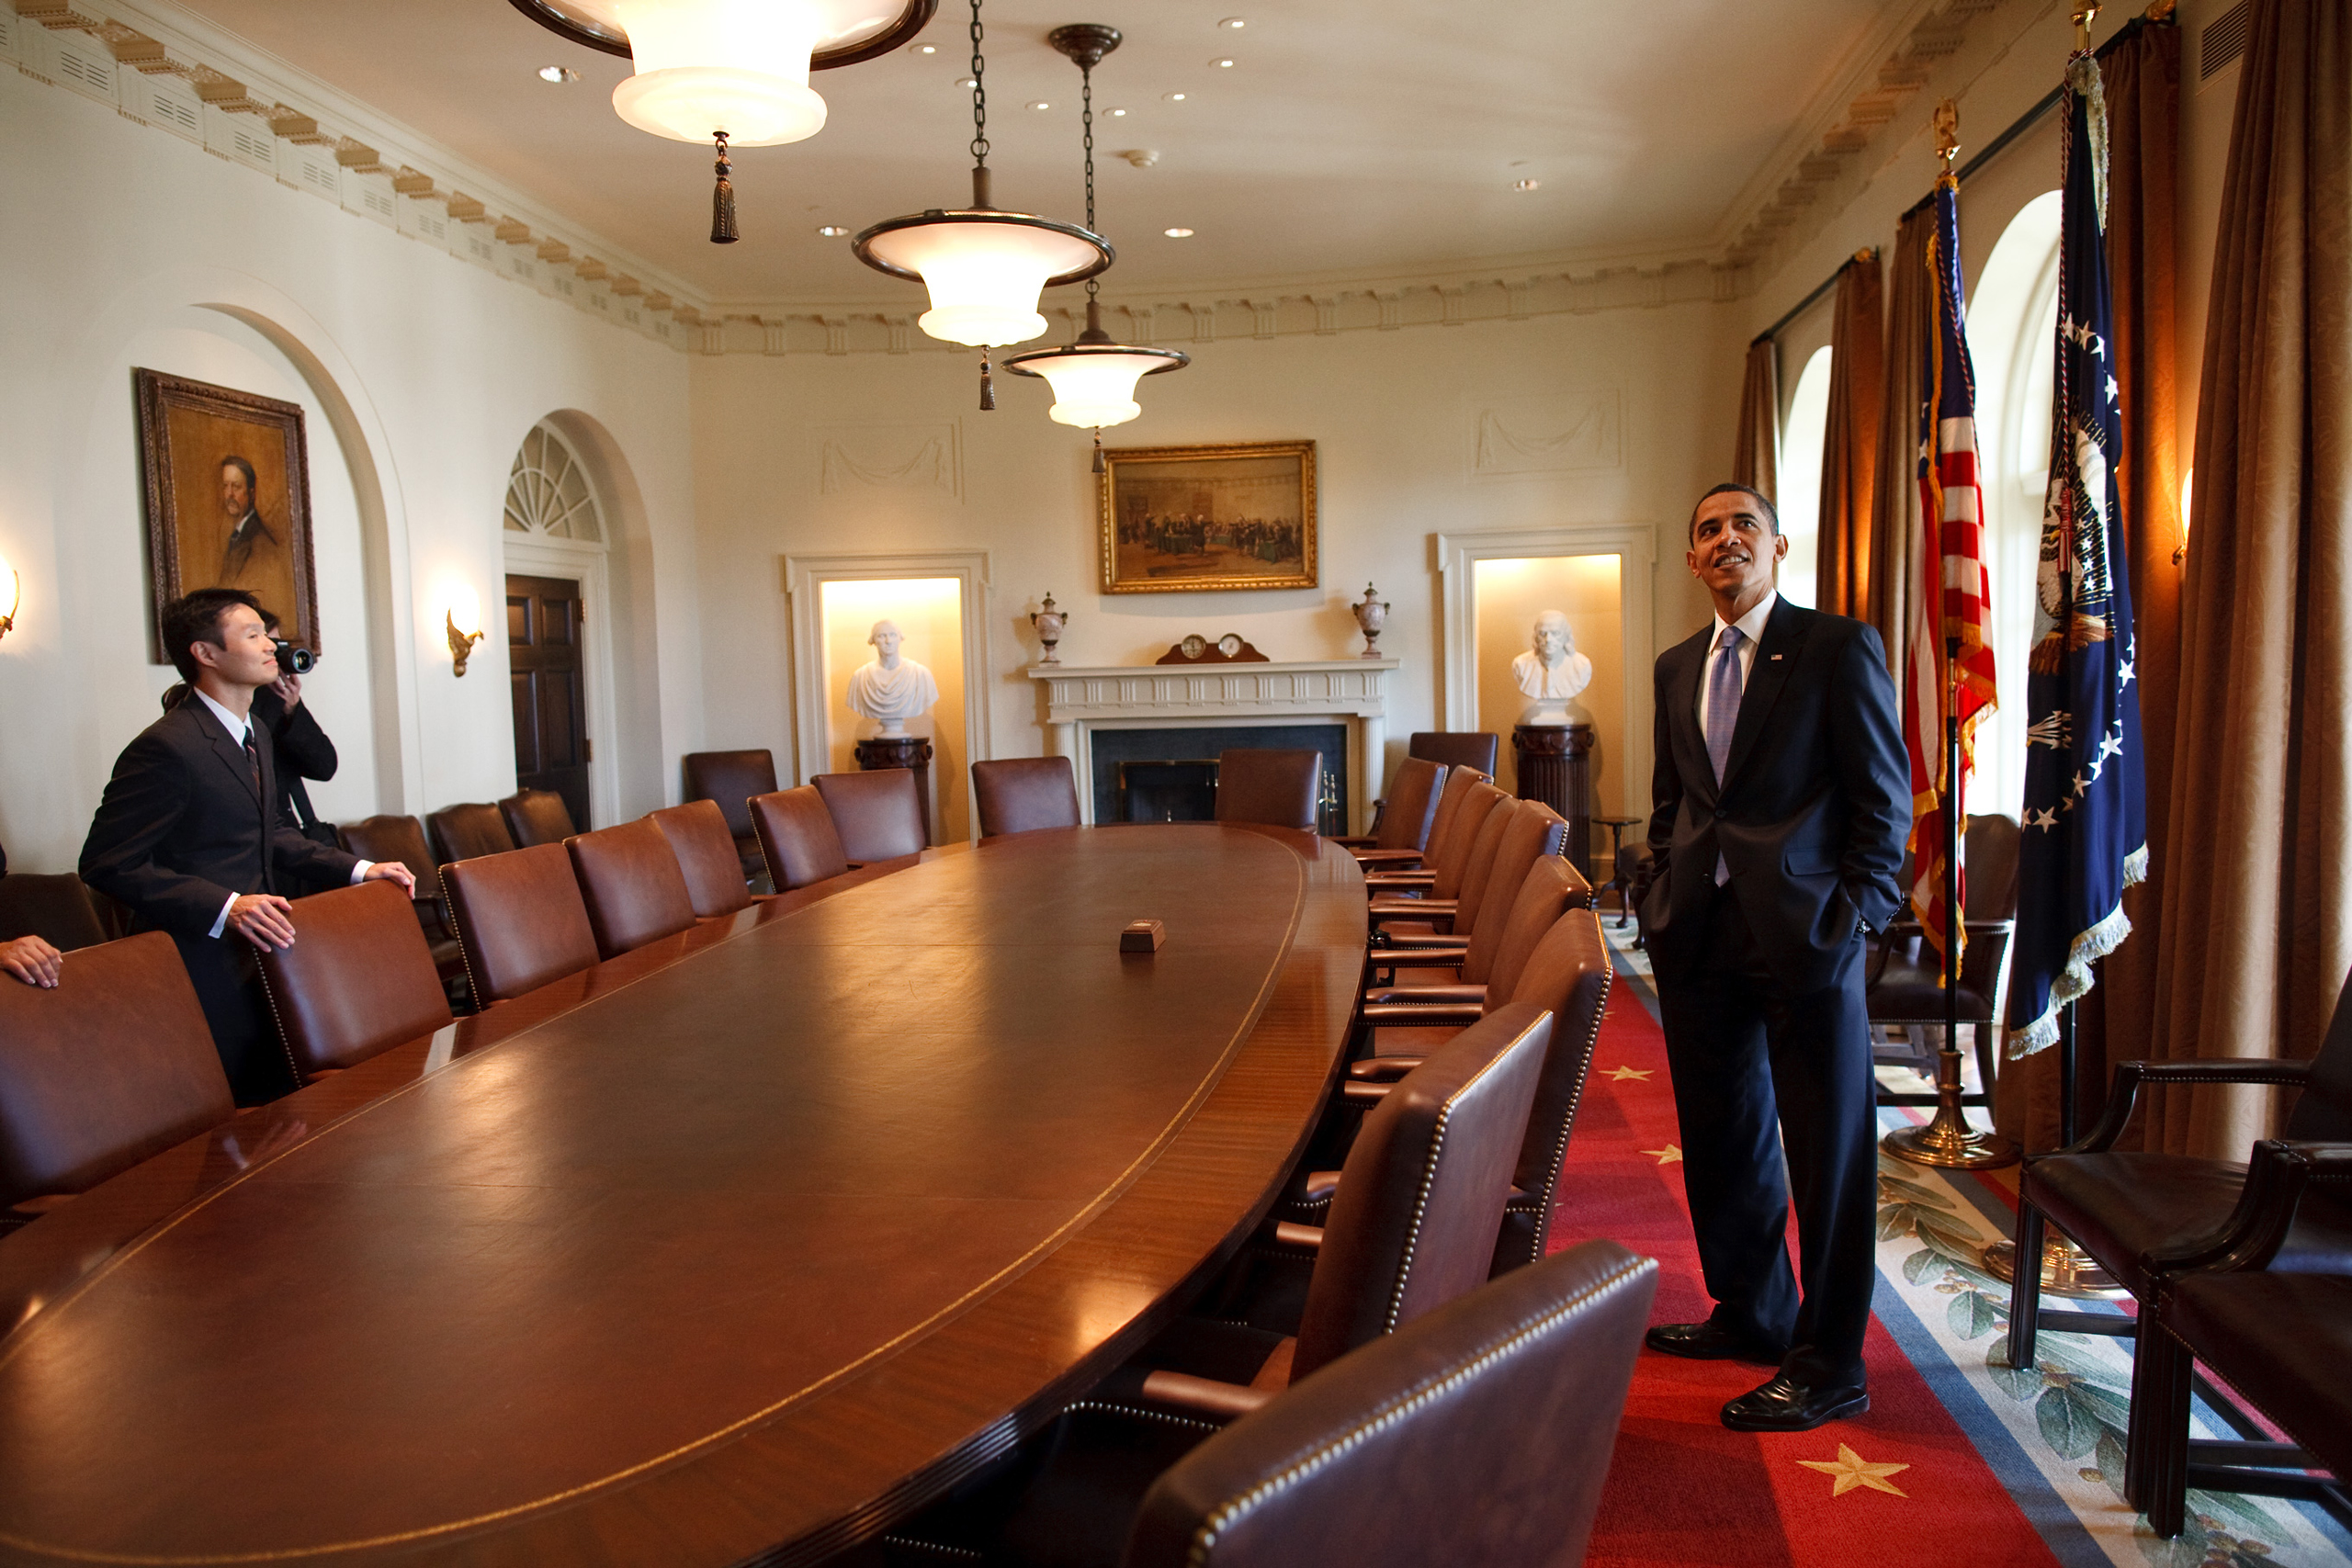 President Barack Obama surveys the Cabinet room with family members while touring the White House on his first day in office.